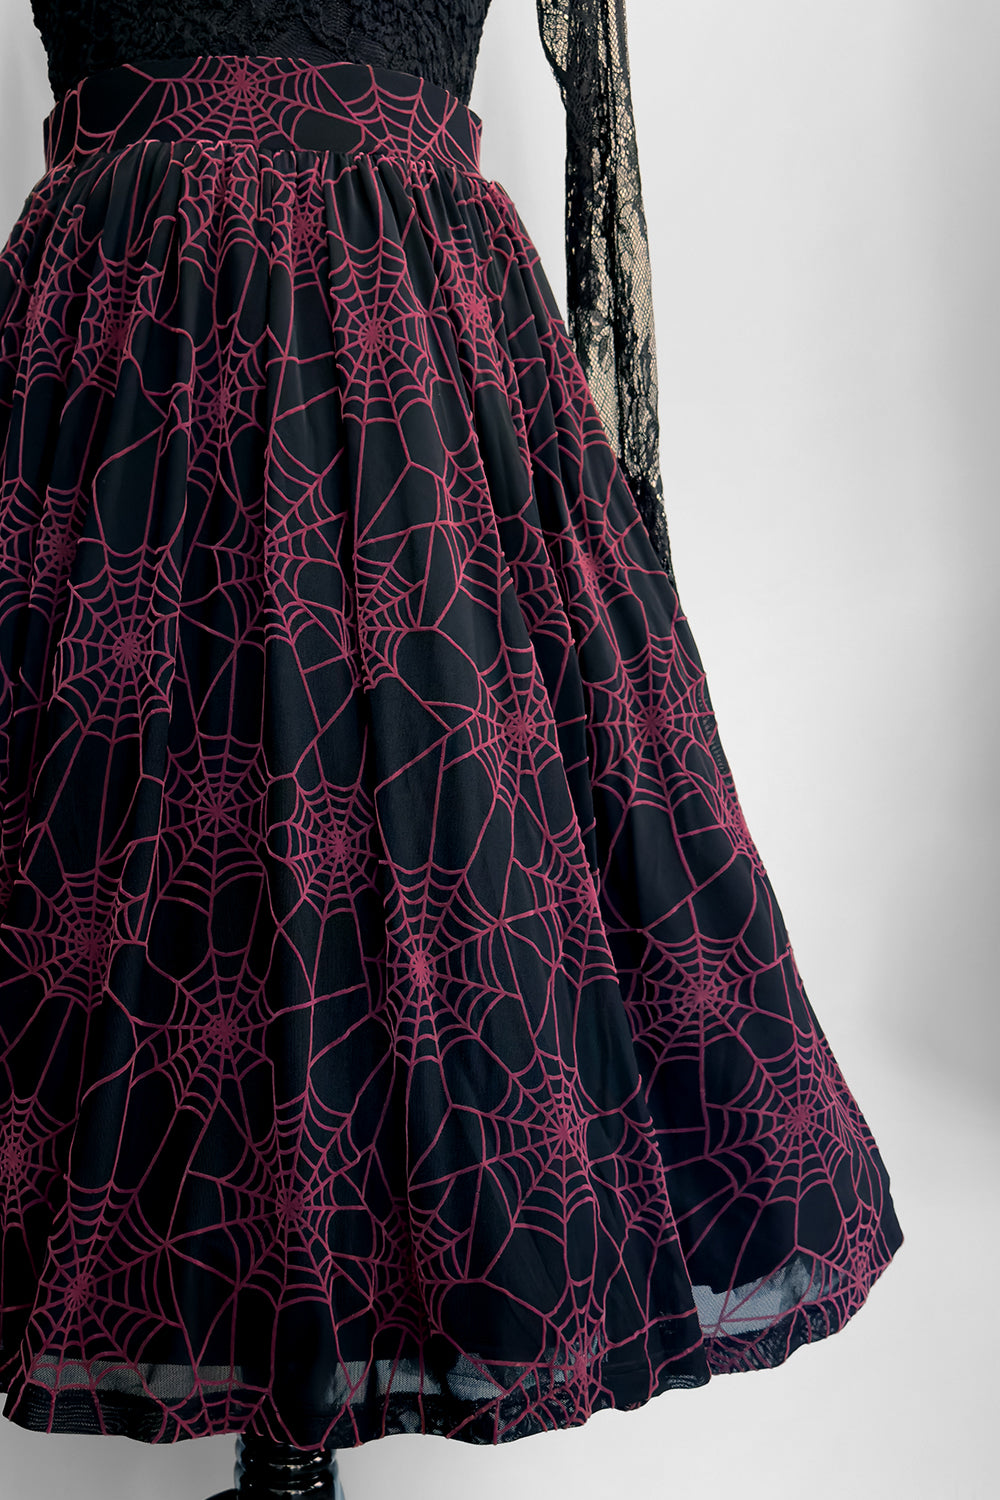 Winchester Mystery House® X TOBS Spiderwebs in the Attic Gathered Skirt